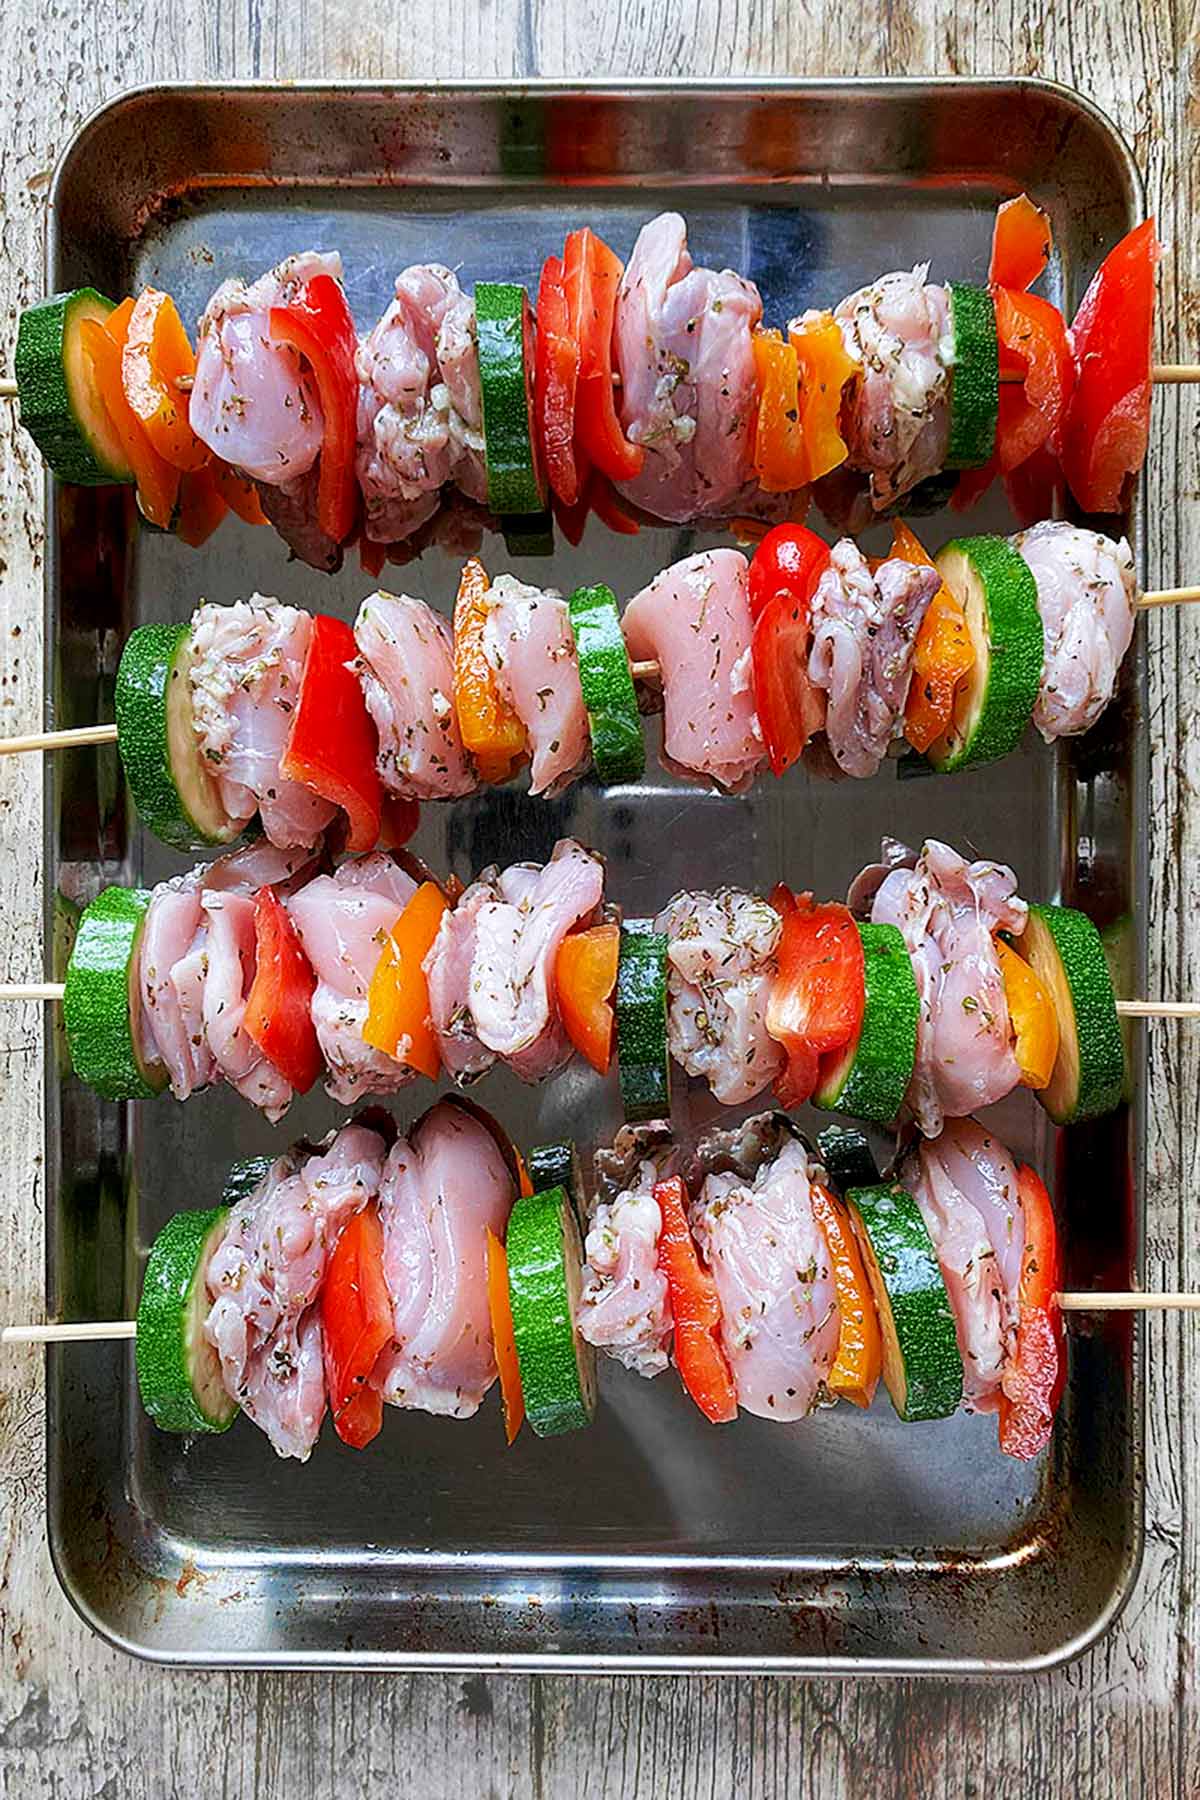 A metal baking tray with four chicken and vegetable skewers on it.